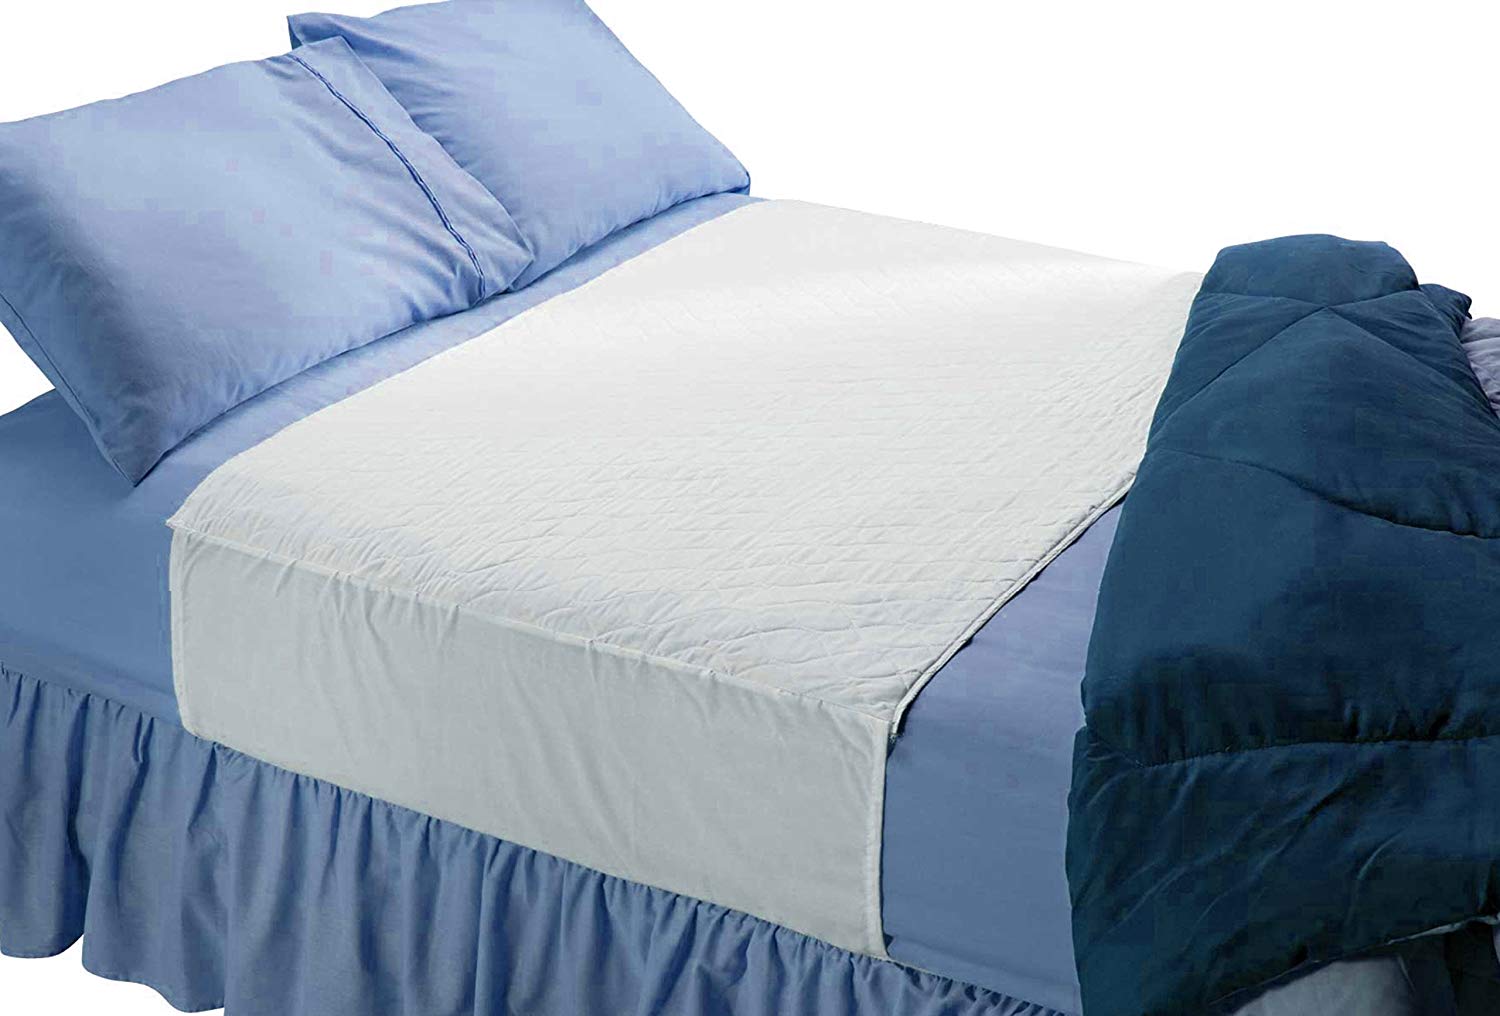 Large Saddle Style Absorbent Bed Pad with Tuck-in Sides - Waterproof W –  BrightCare